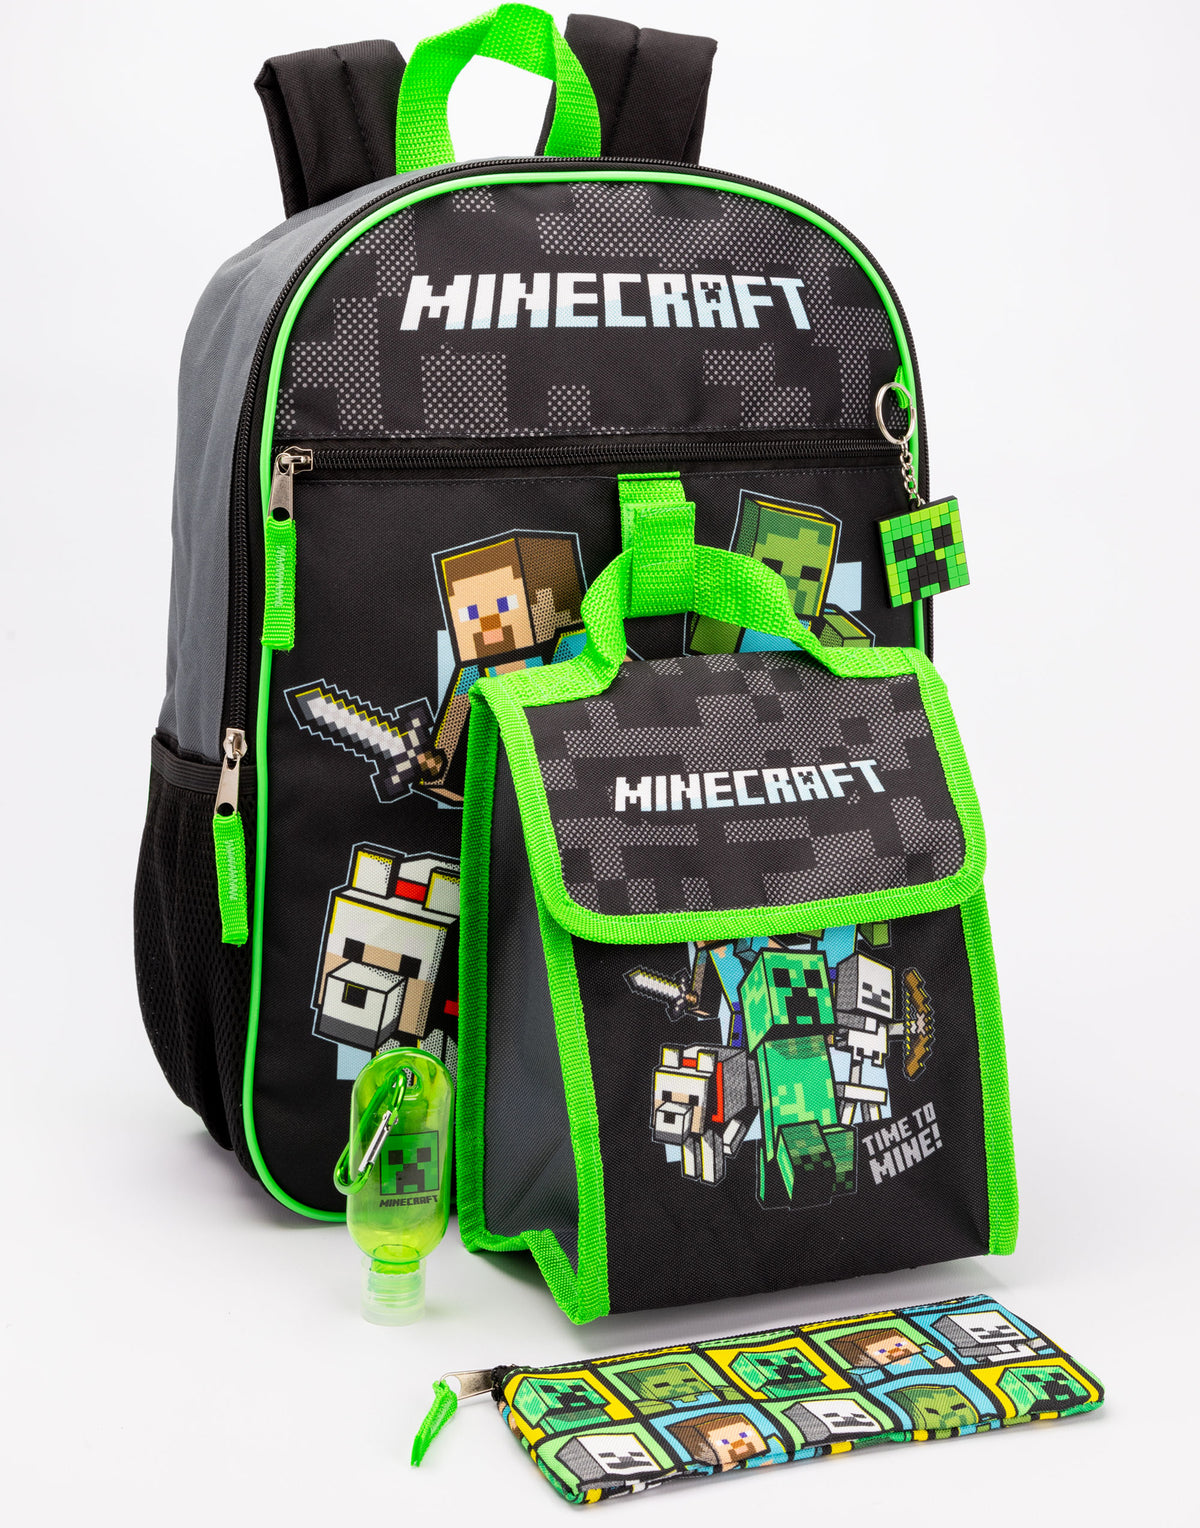 Minecraft Pickaxe Insulated Lunch Tote